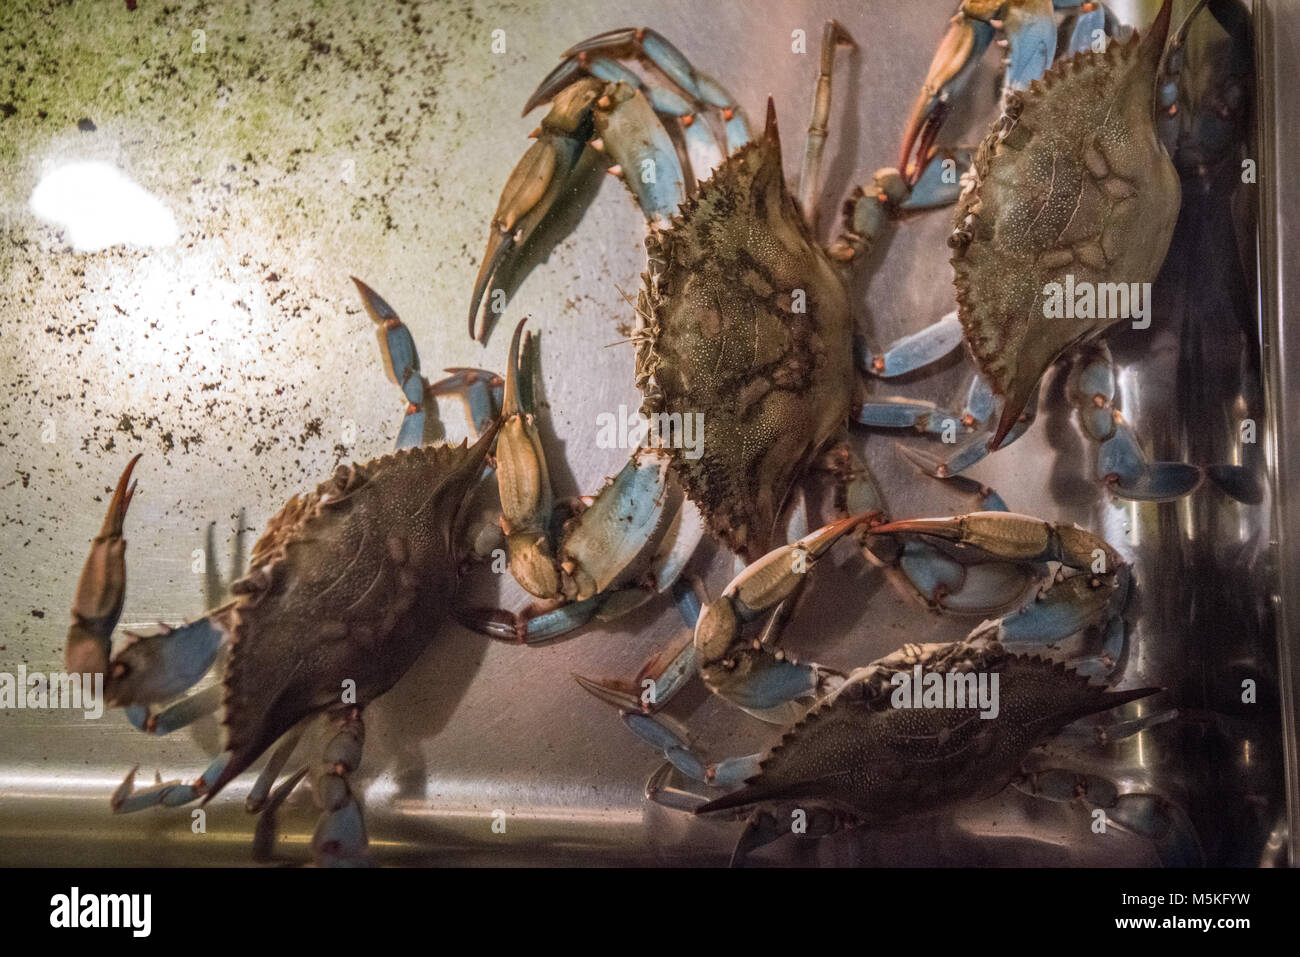 Multiple Chesapeake blue crabs crawling along in metal tray full of water, Dundalk, Maryland. Stock Photo